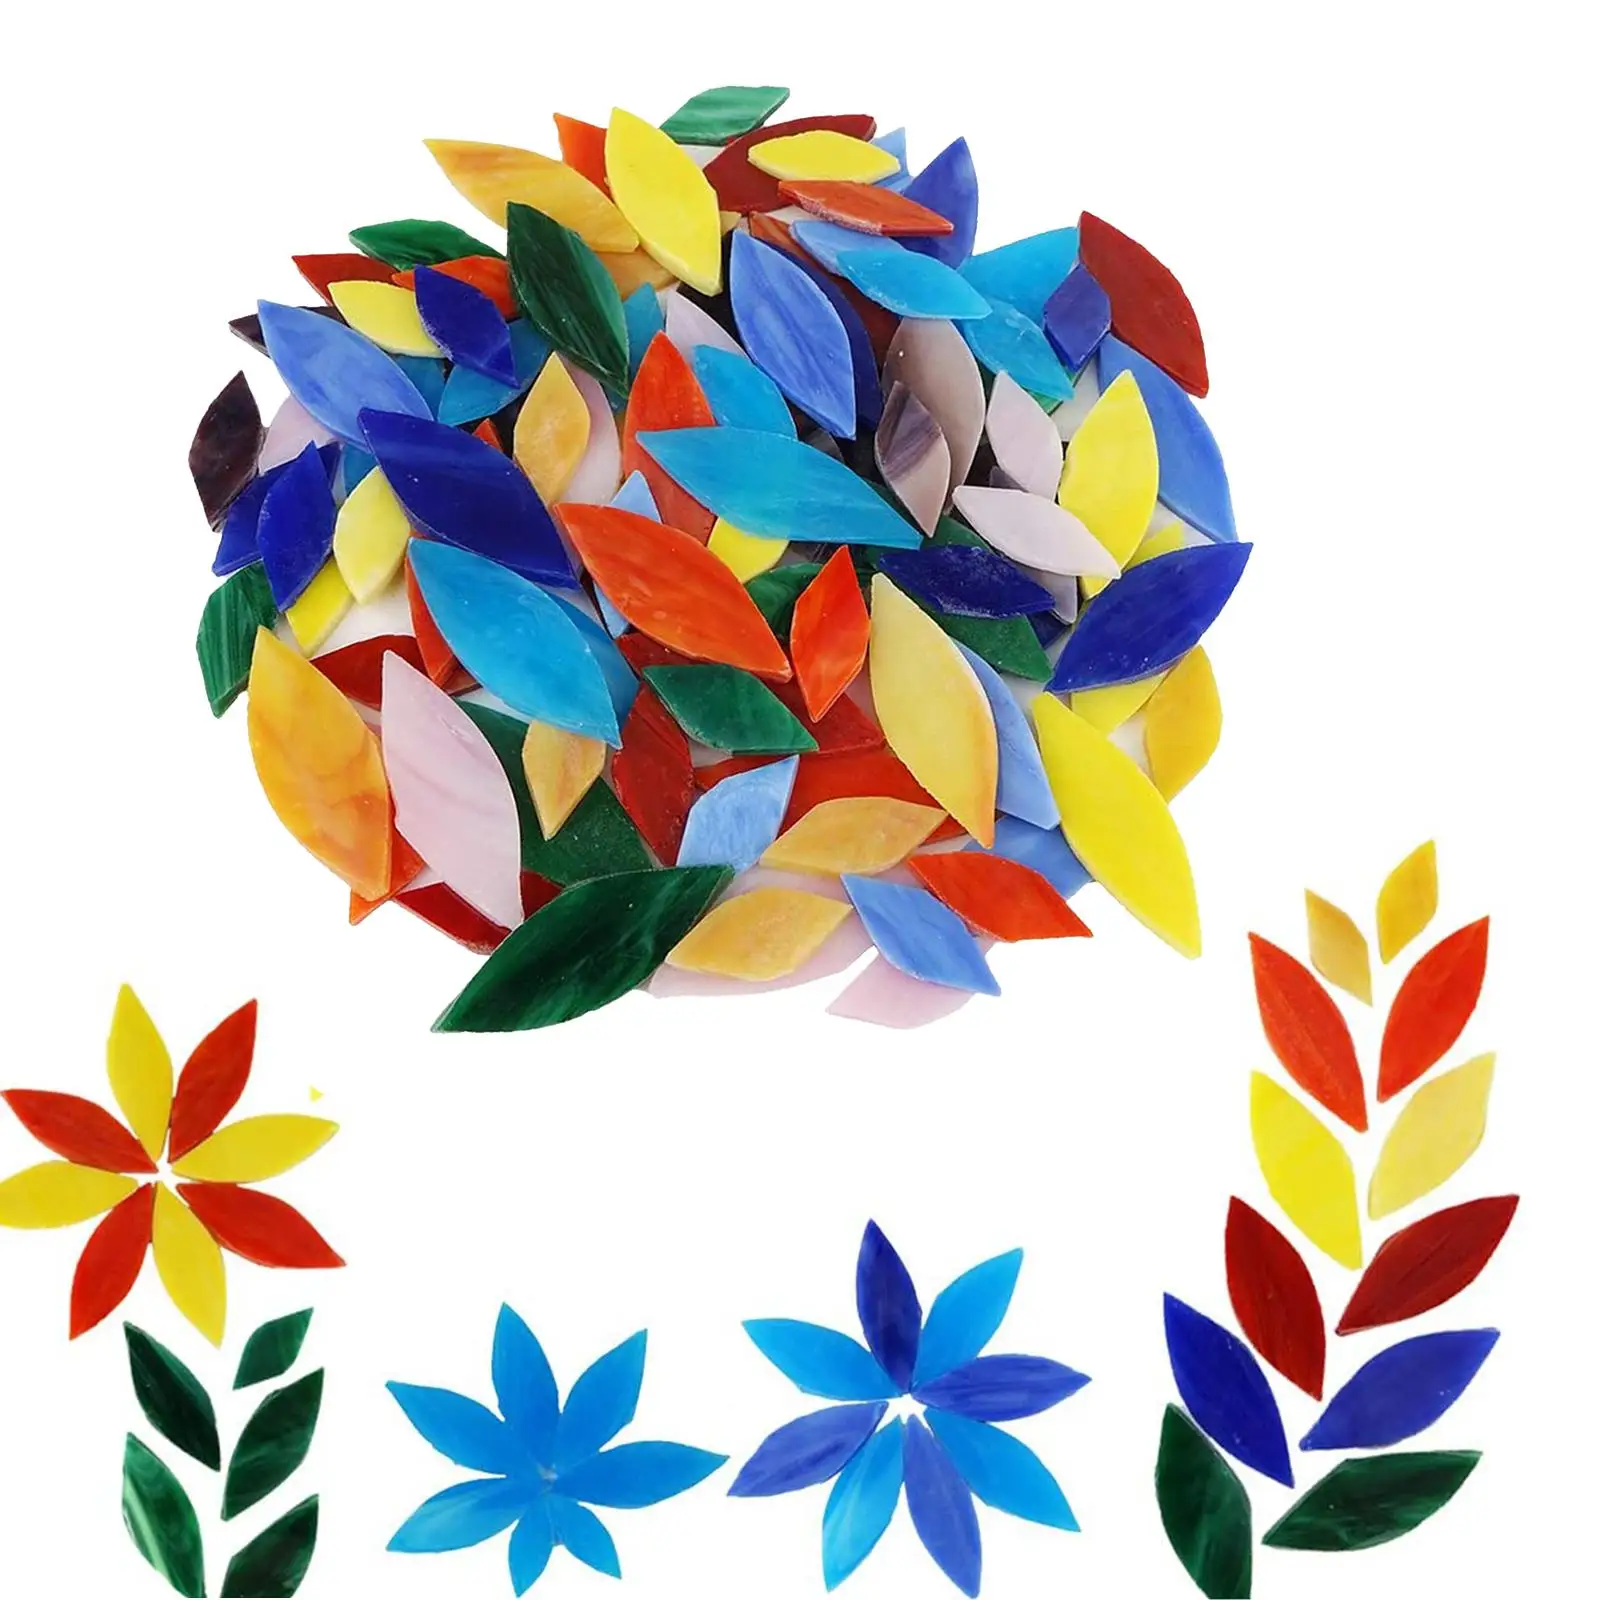 100pcs Assorted Colors Petal Mosaic Tiles Hand-Cut Stained Glass for Crafts